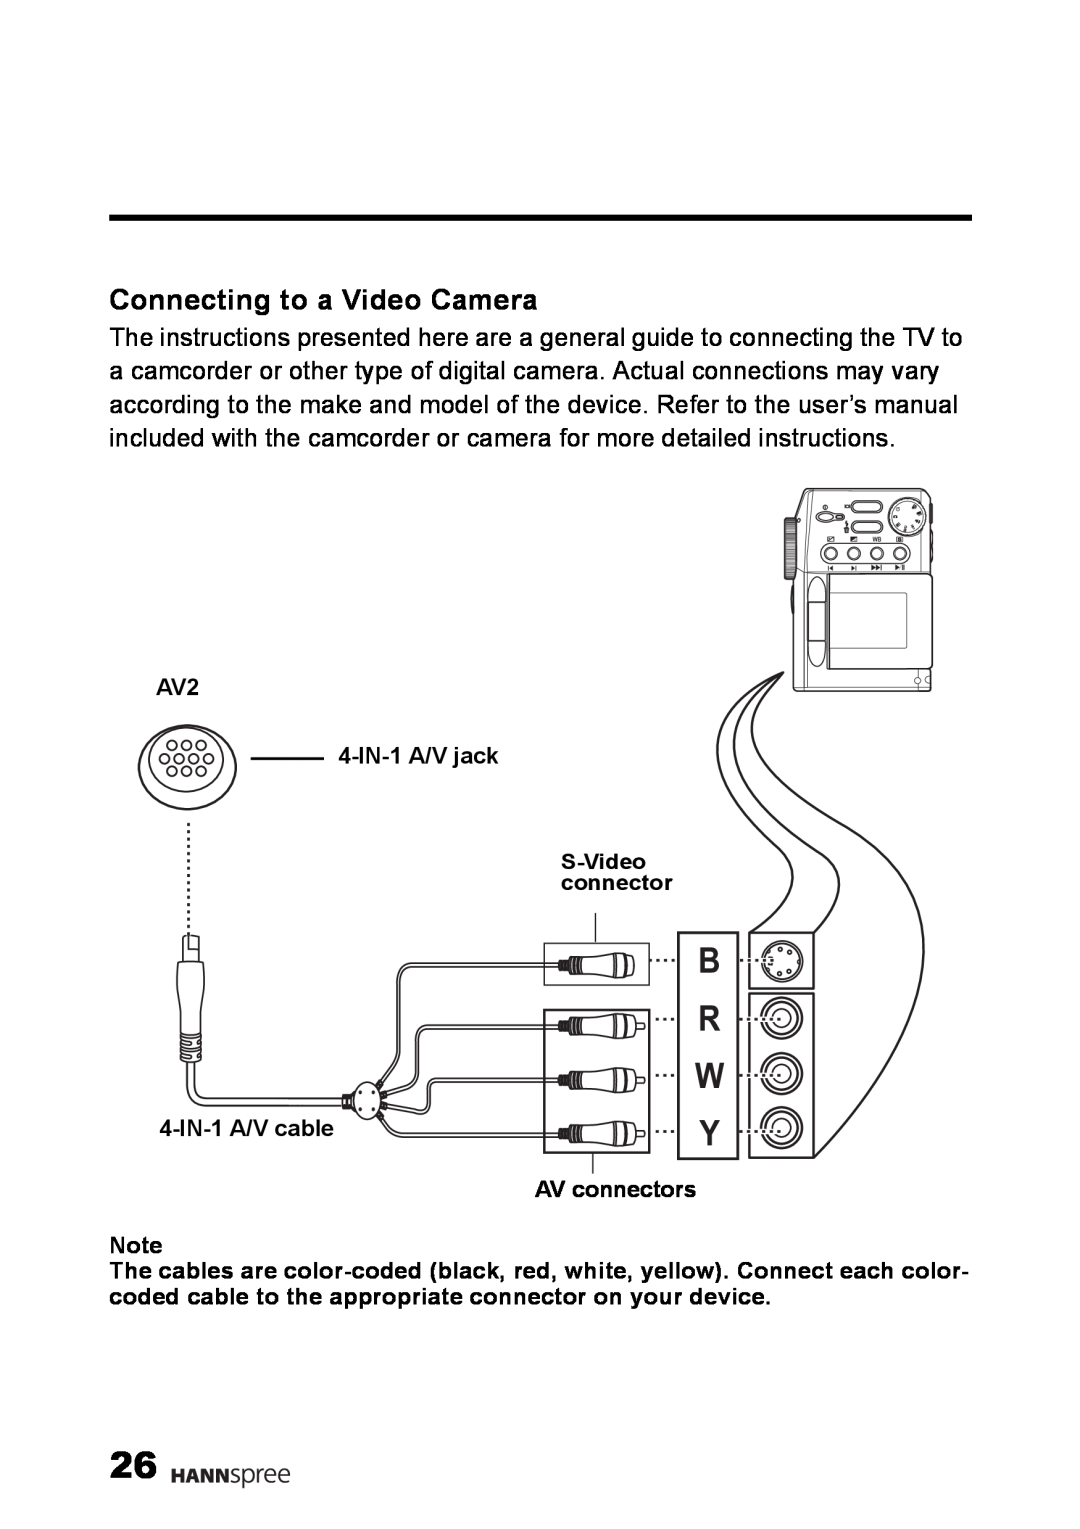 HANNspree LT02-12U1-000 user manual Connecting to a Video Camera 